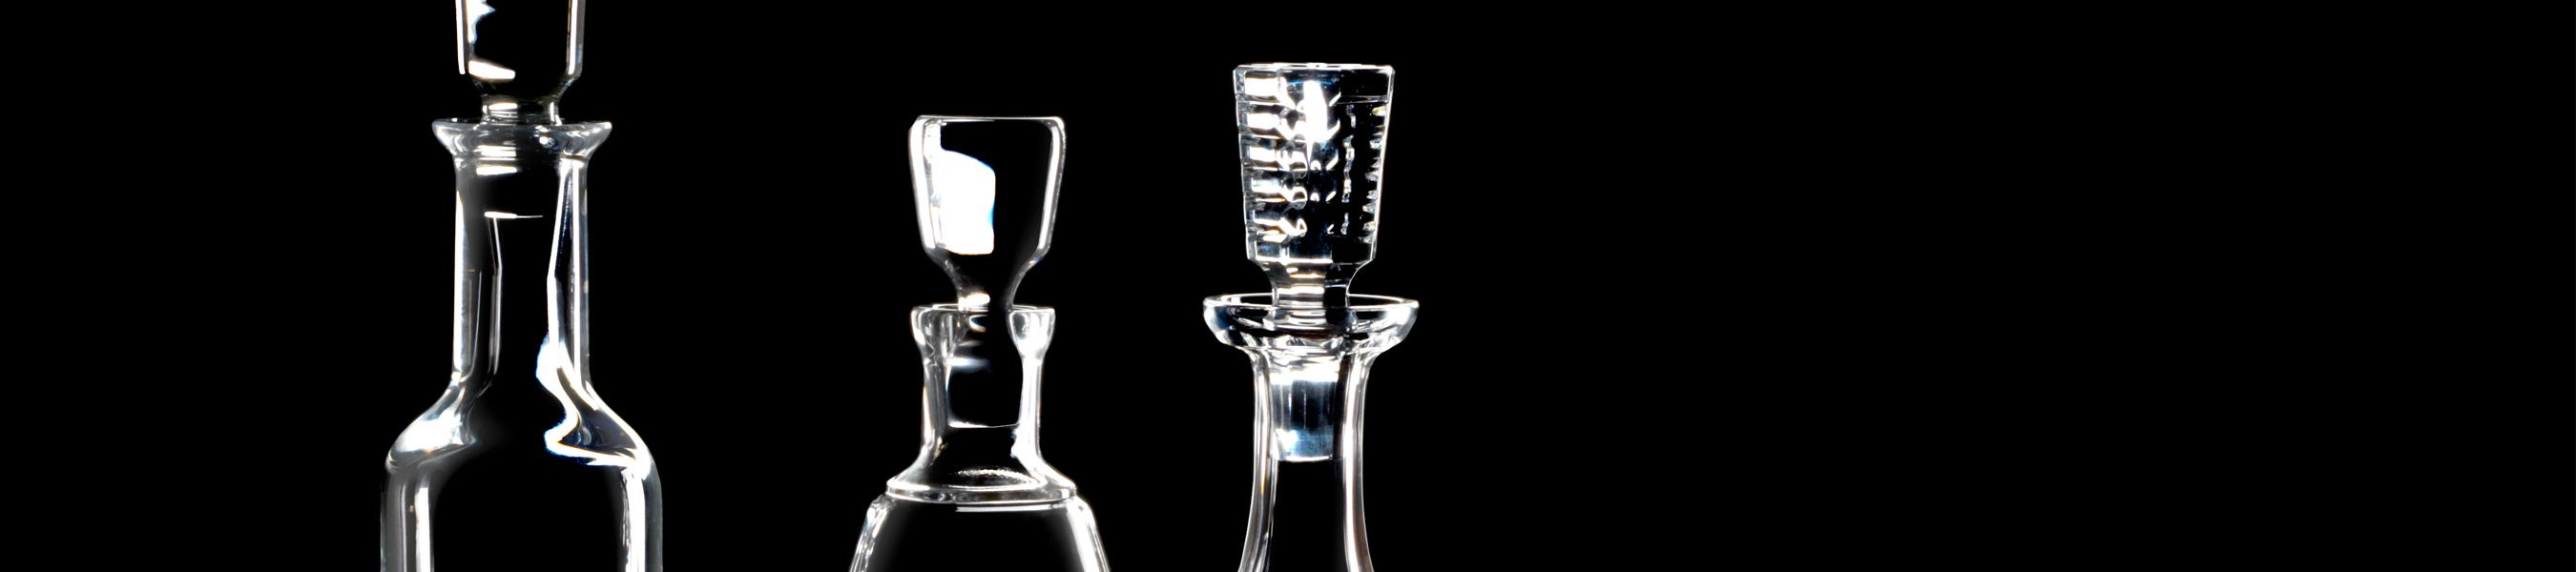 19 Fashionable Antique Waterford Crystal Vases 2024 free download antique waterford crystal vases of crystal decanters pitchers carafes waterforda us inside waterford crystal decanters pitchers carafes